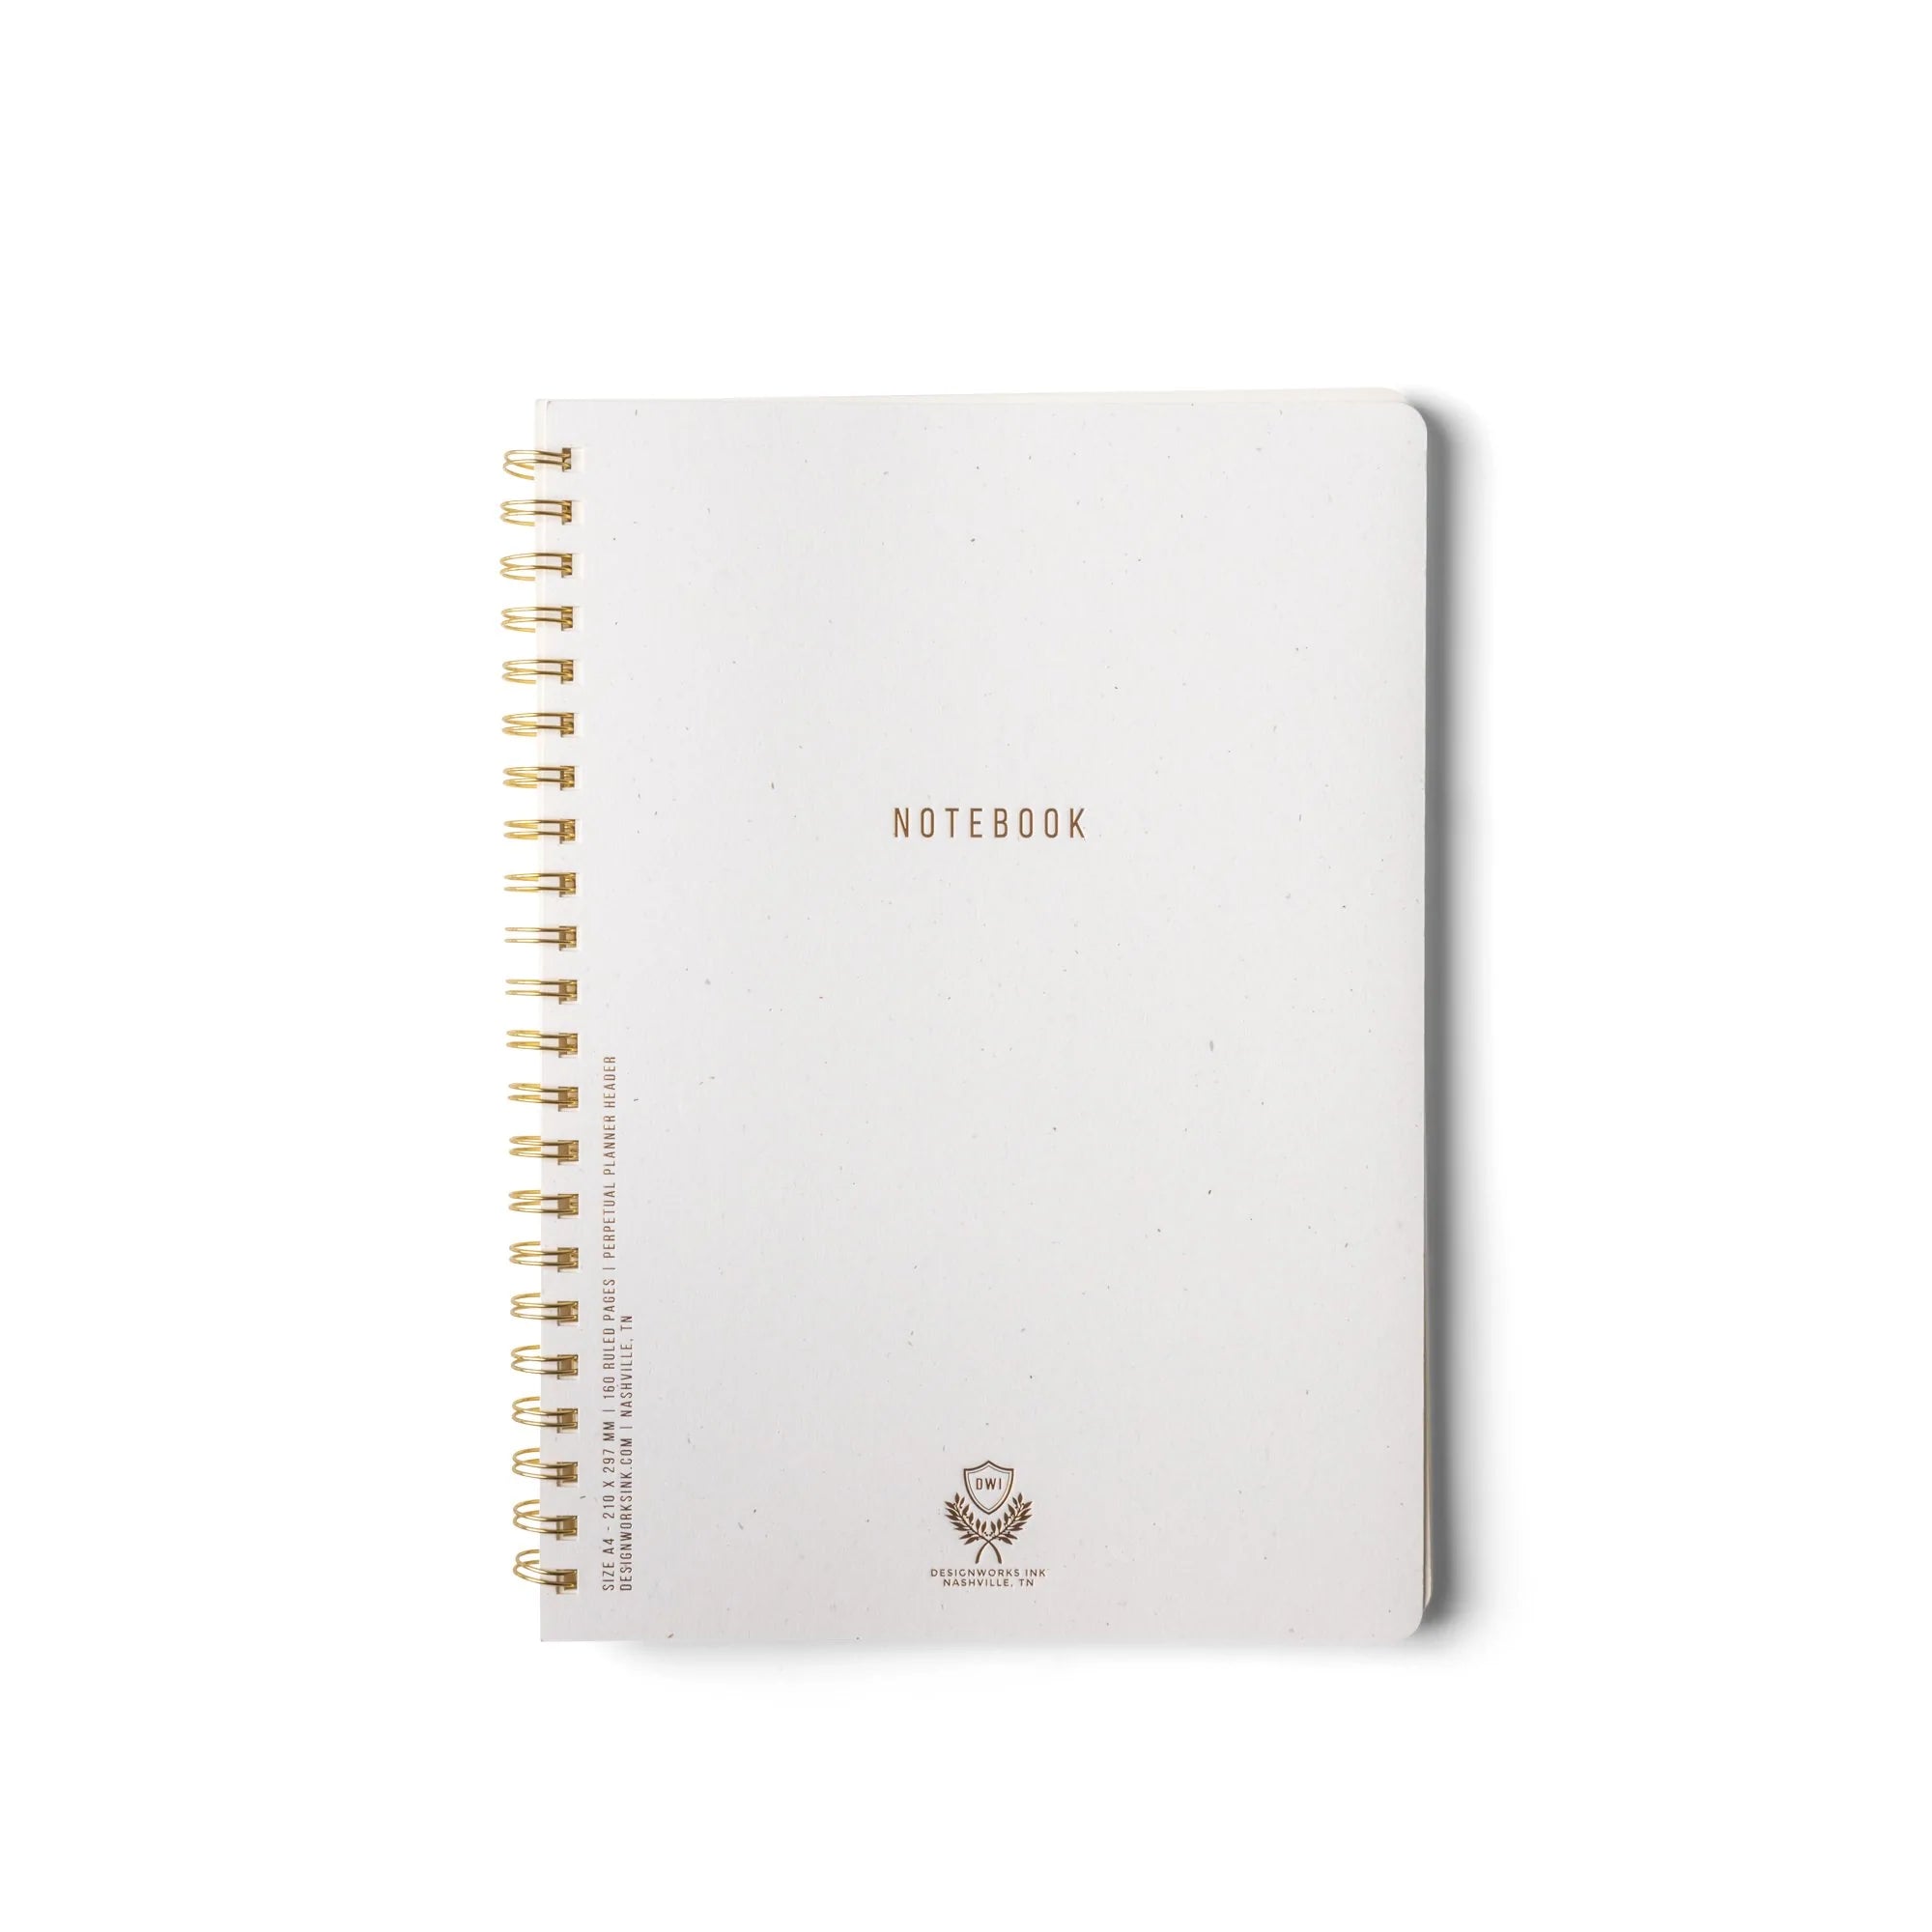 Designworks Textured Paper Cover Twin Wire A5 Crest Notebook